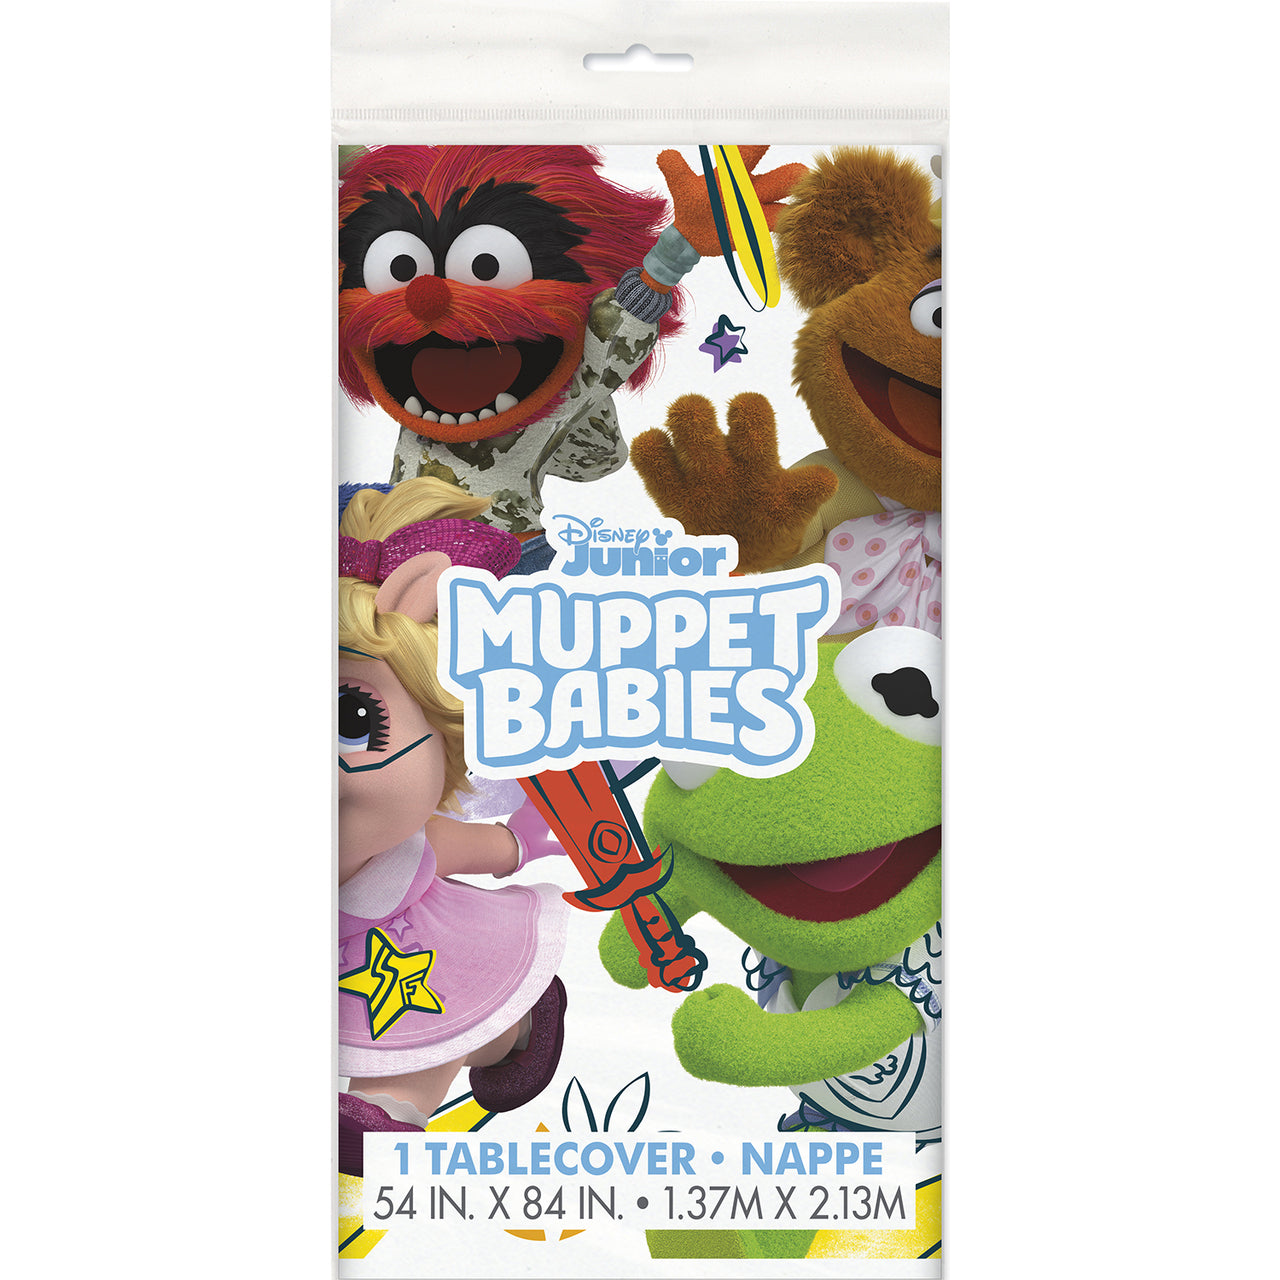 The Muppet Babies Plastic Table Cover (1 Piece)